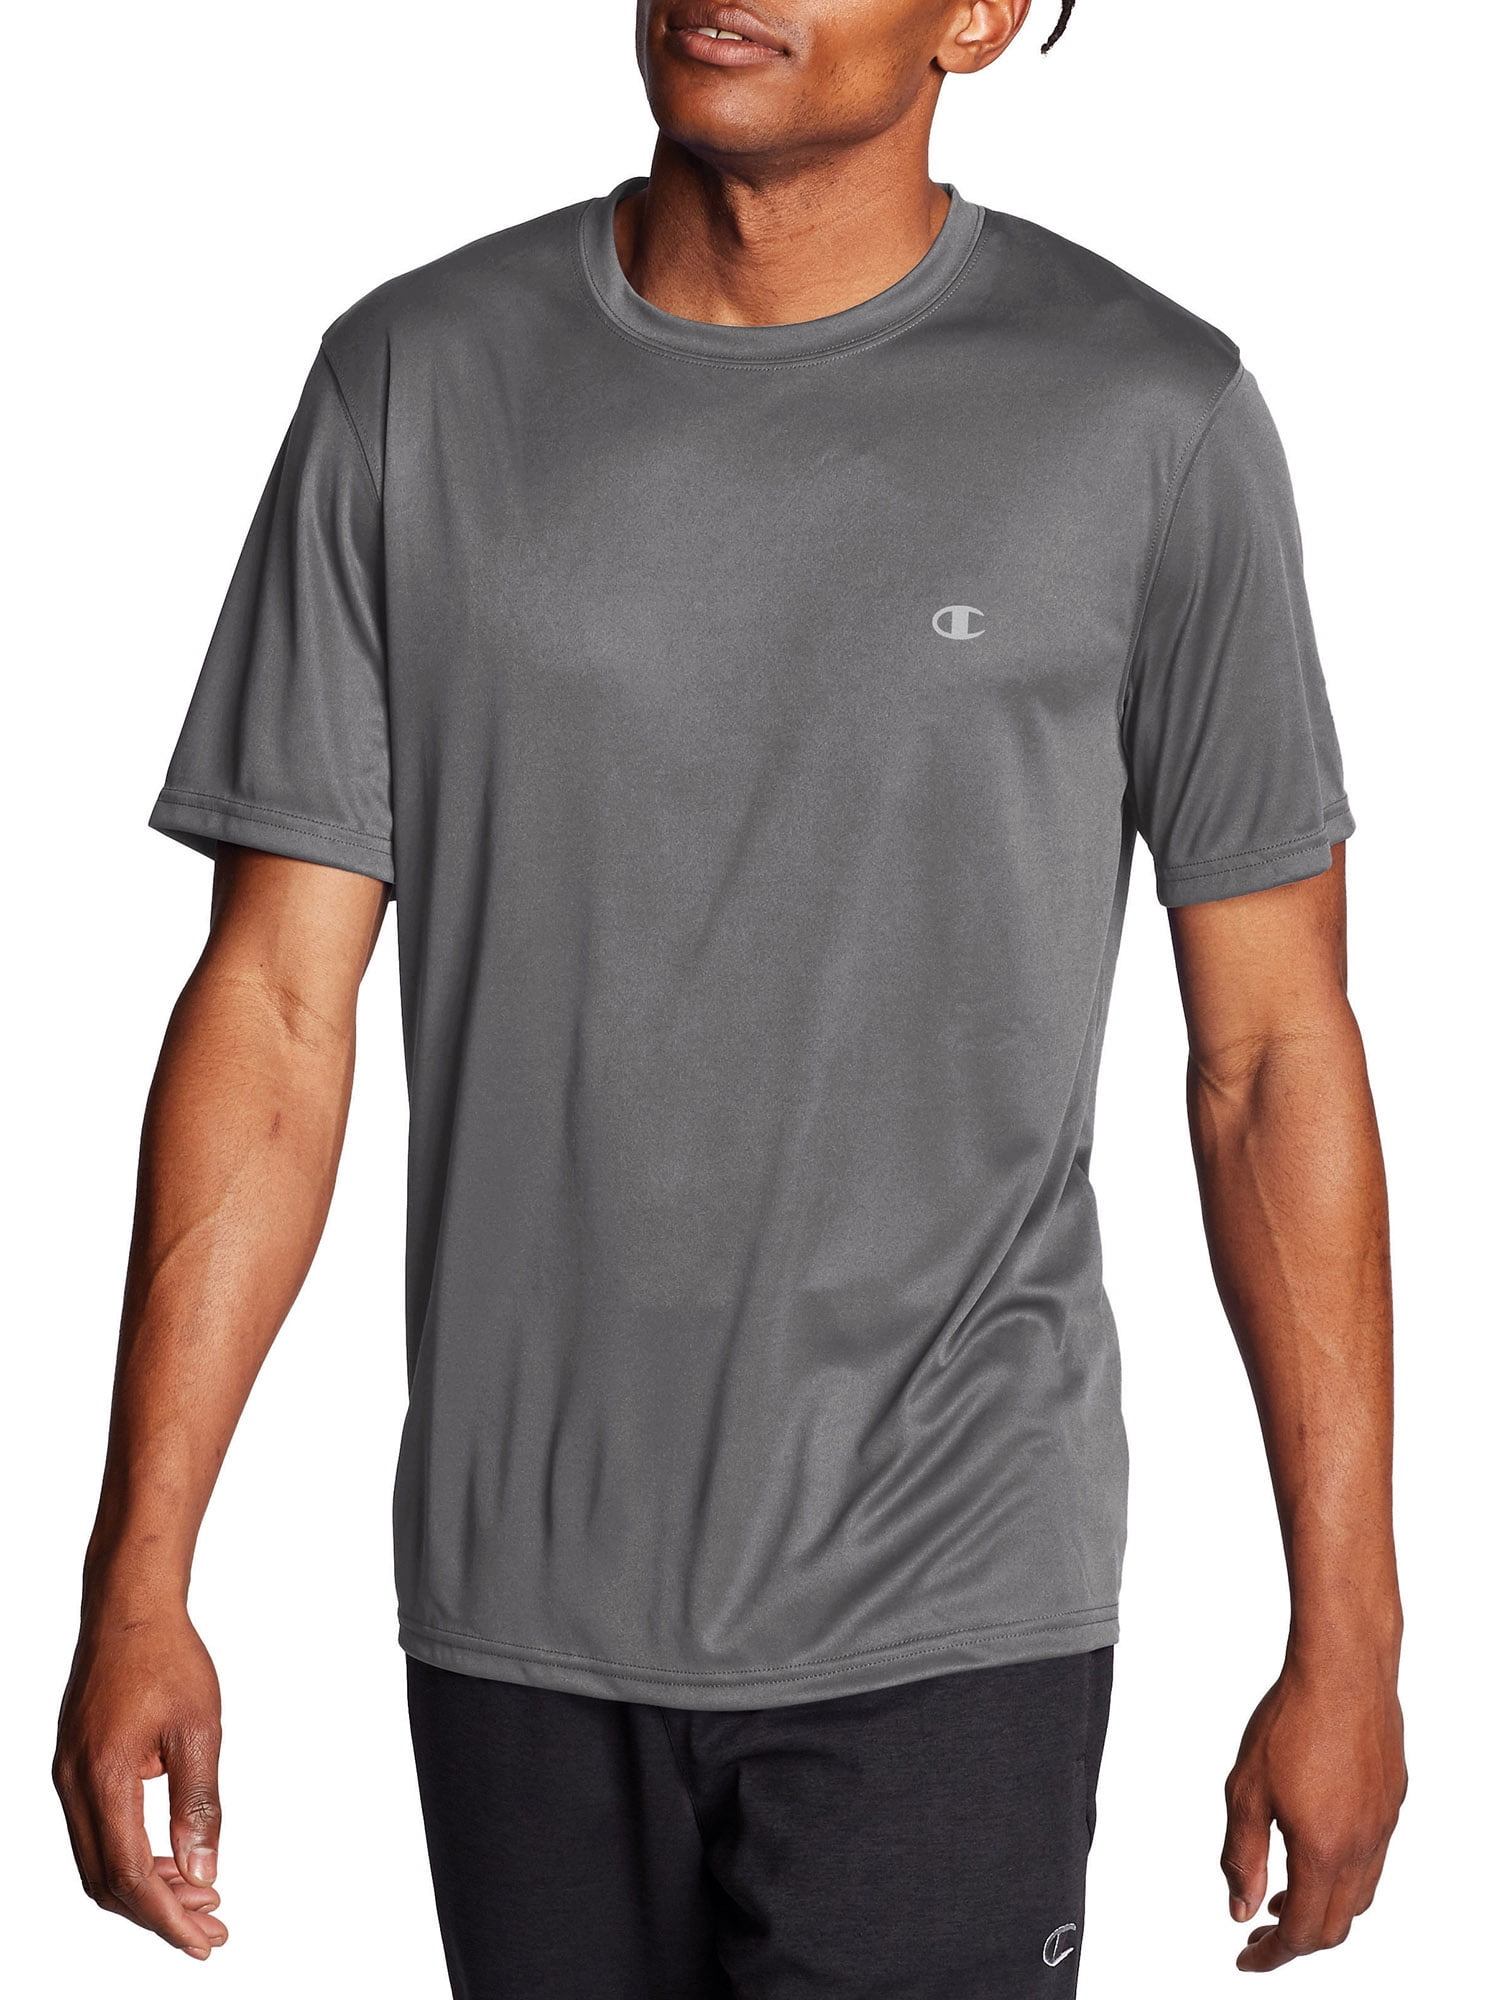 Champion Men's Double Dry Performance T-Shirt, up to Size 2XL 